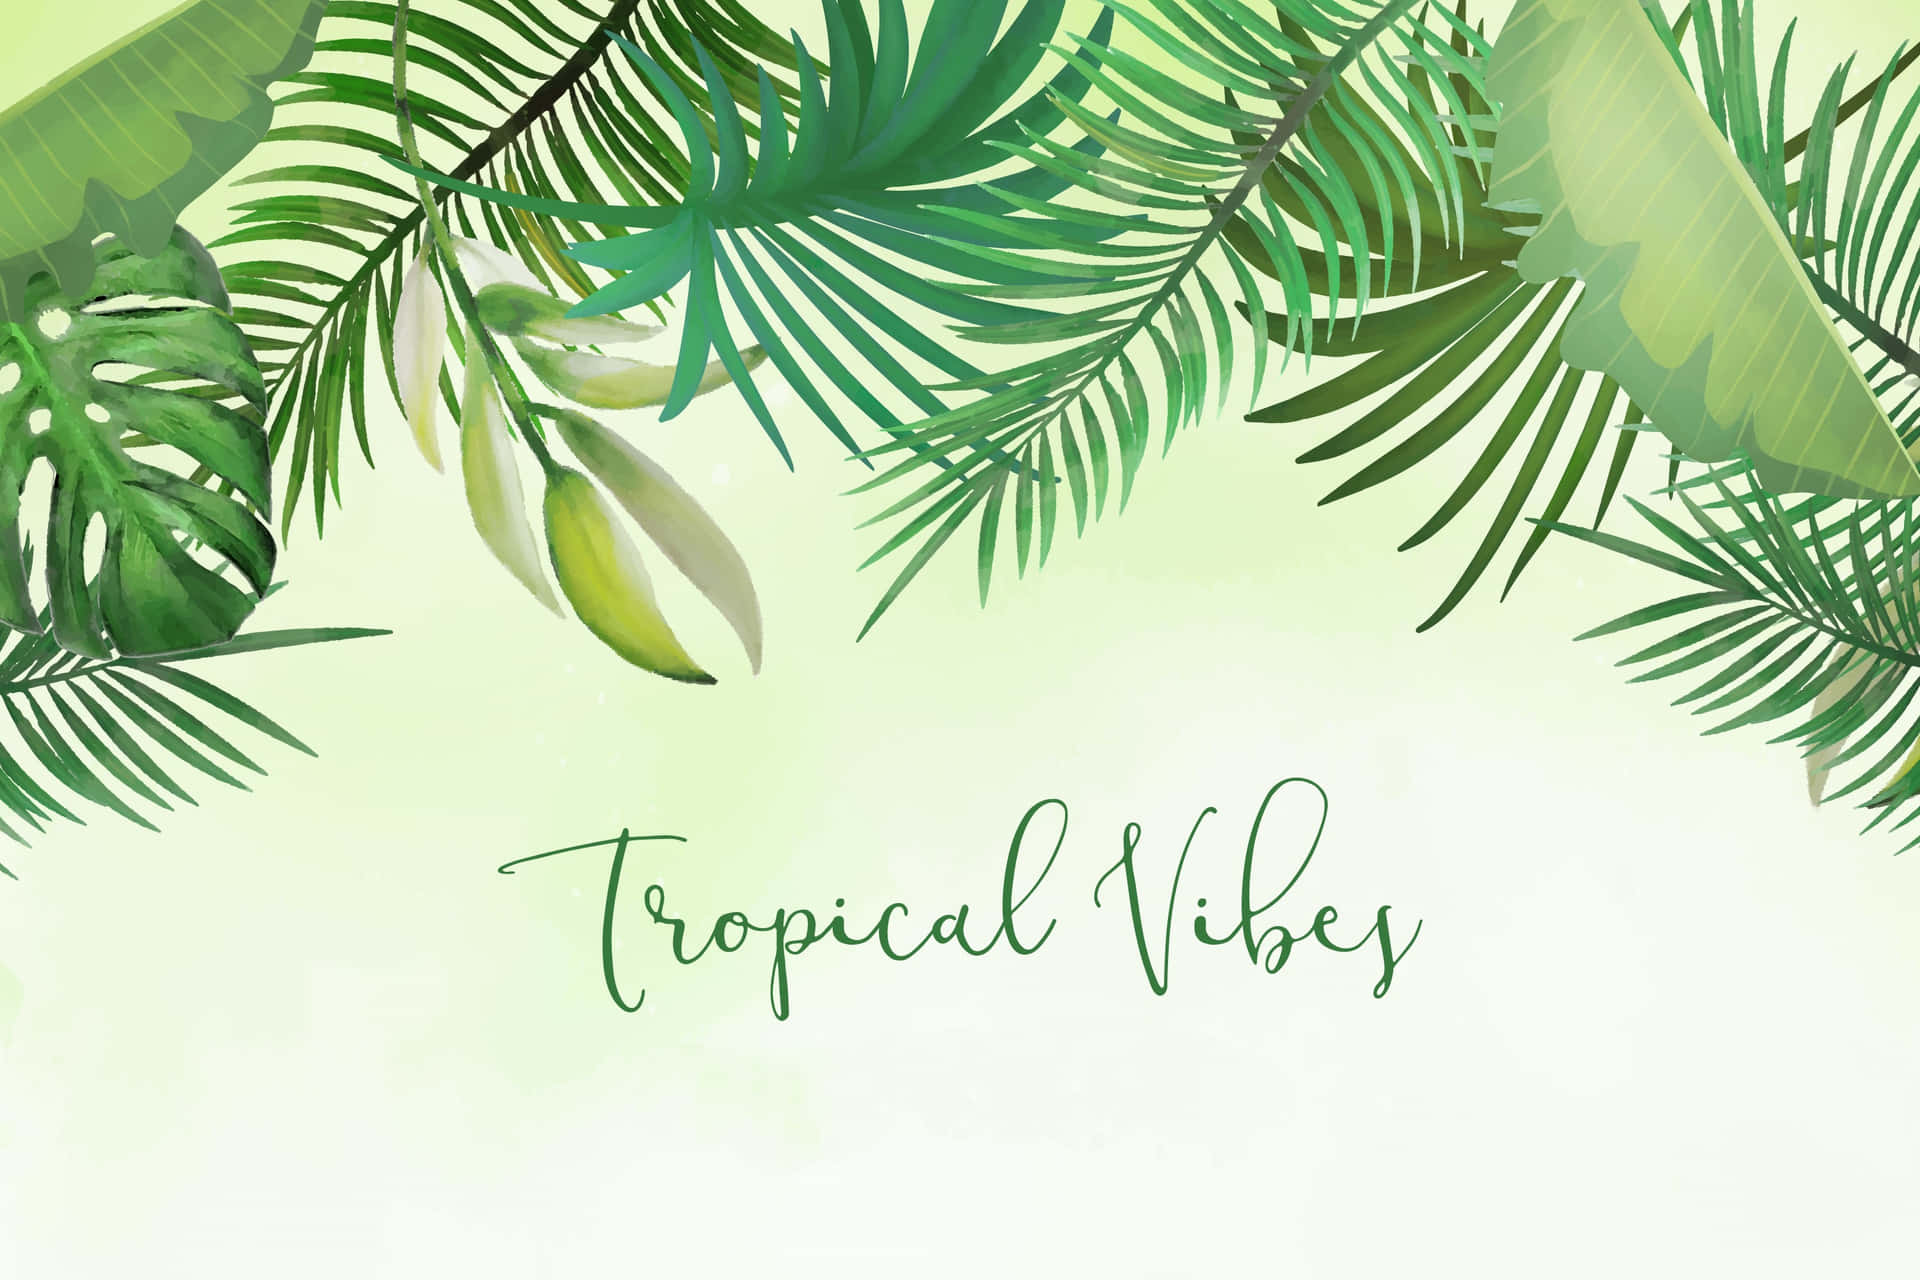 Tropical Vibes Palm Fronds Background Wallpaper